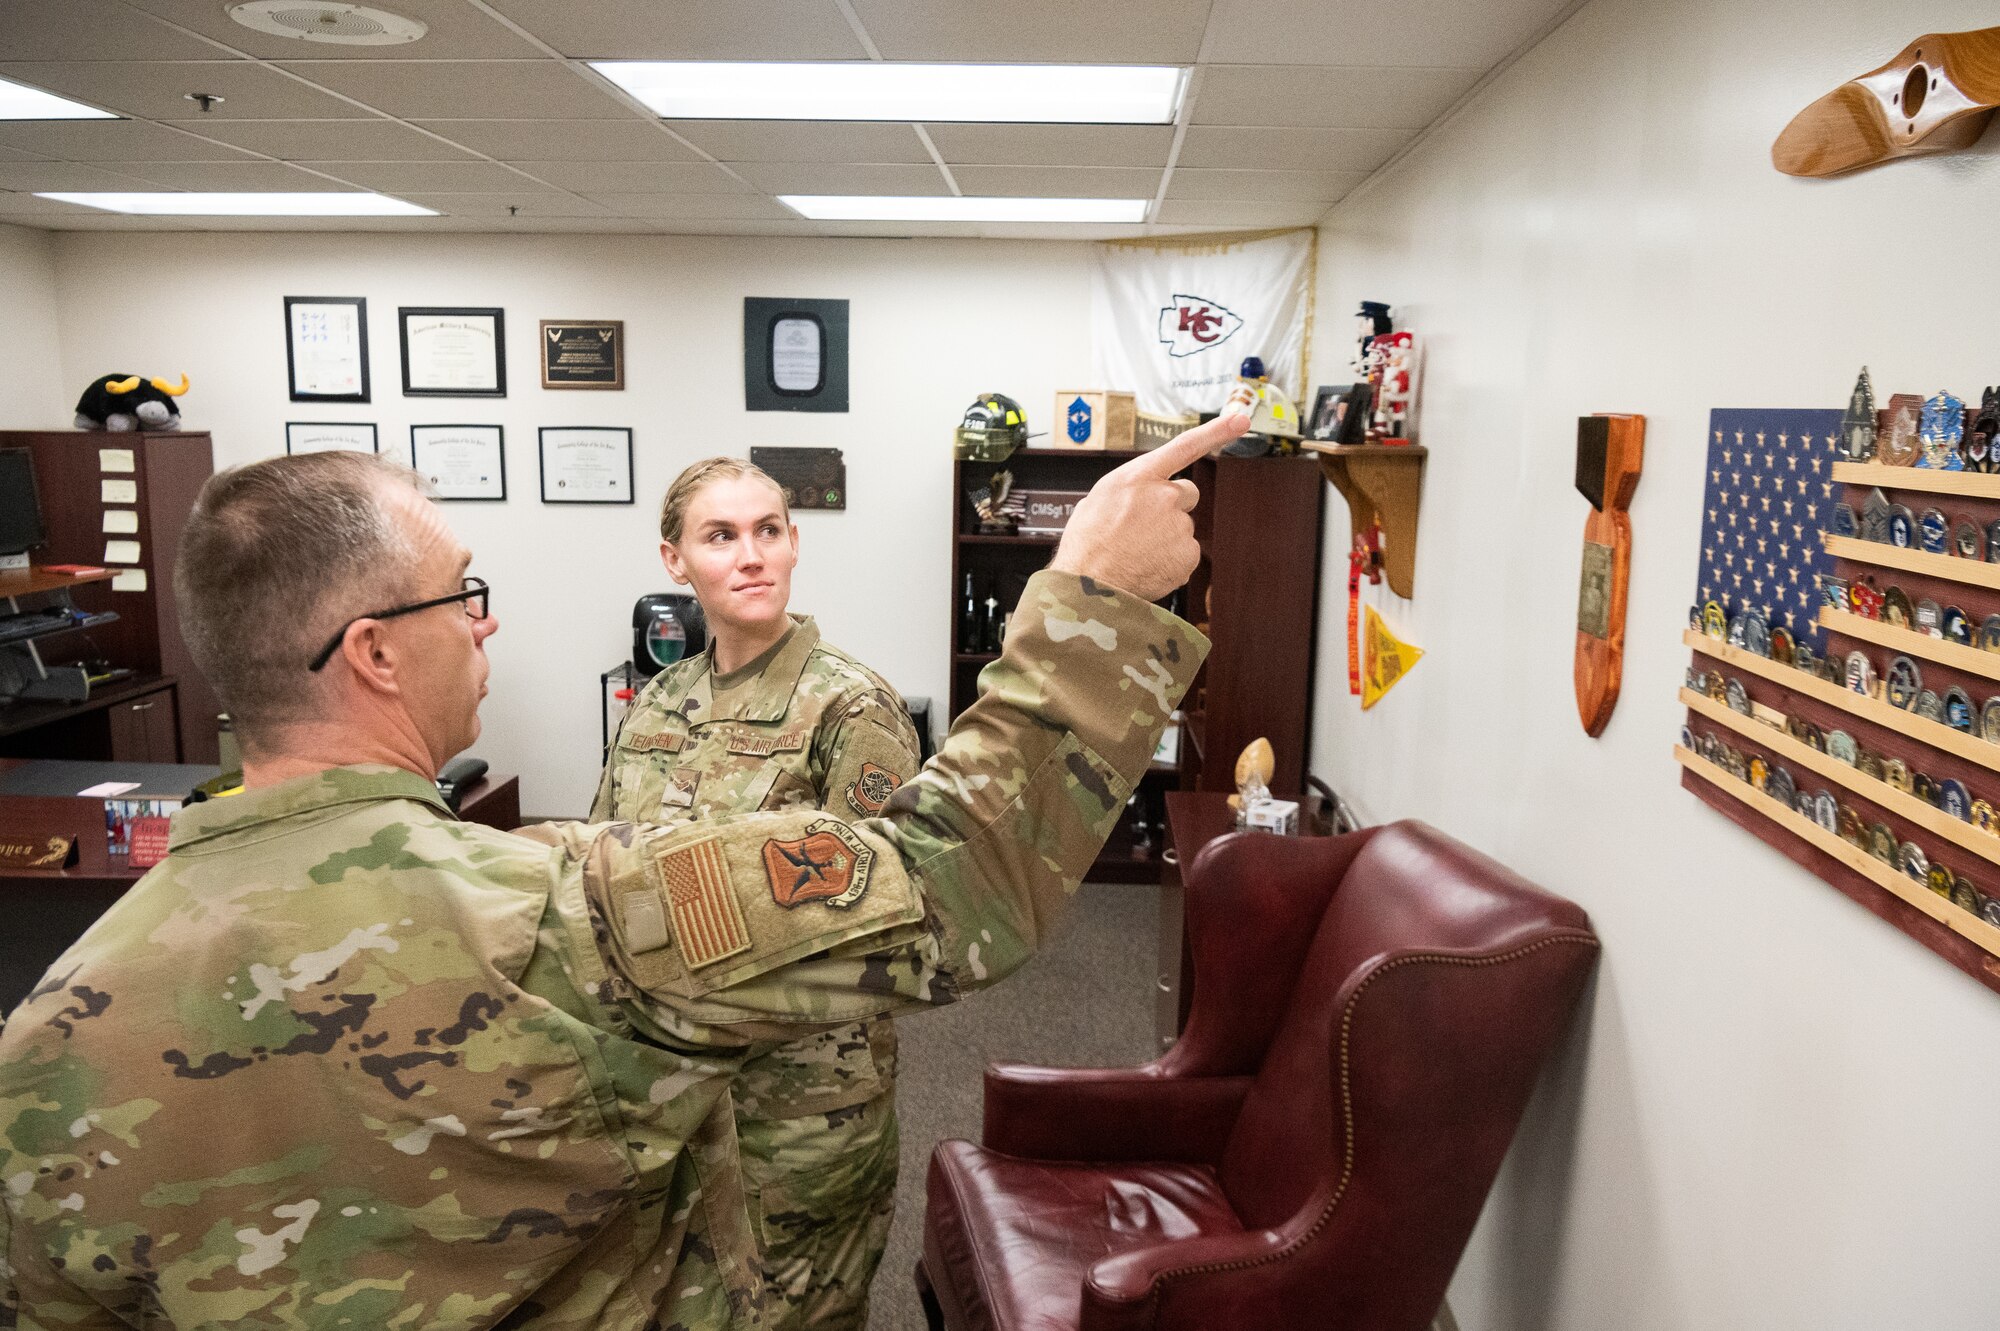 Chief Master Sgt. Timothy Bayes, left, 436th Airlift Wing command chief, discusses office mementoes with Airman 1st Class Shayna Teunissen, 436th Comptroller Squadron budget analyst, at Dover Air Force Base, Delaware, March 16, 2022. Teunissen accompanied Bayes as part of the Chief for the Day mentoring program, which offers Airmen a first-hand experience of the command chief’s typical work day. (U.S. Air Force photo by Mauricio Campino)